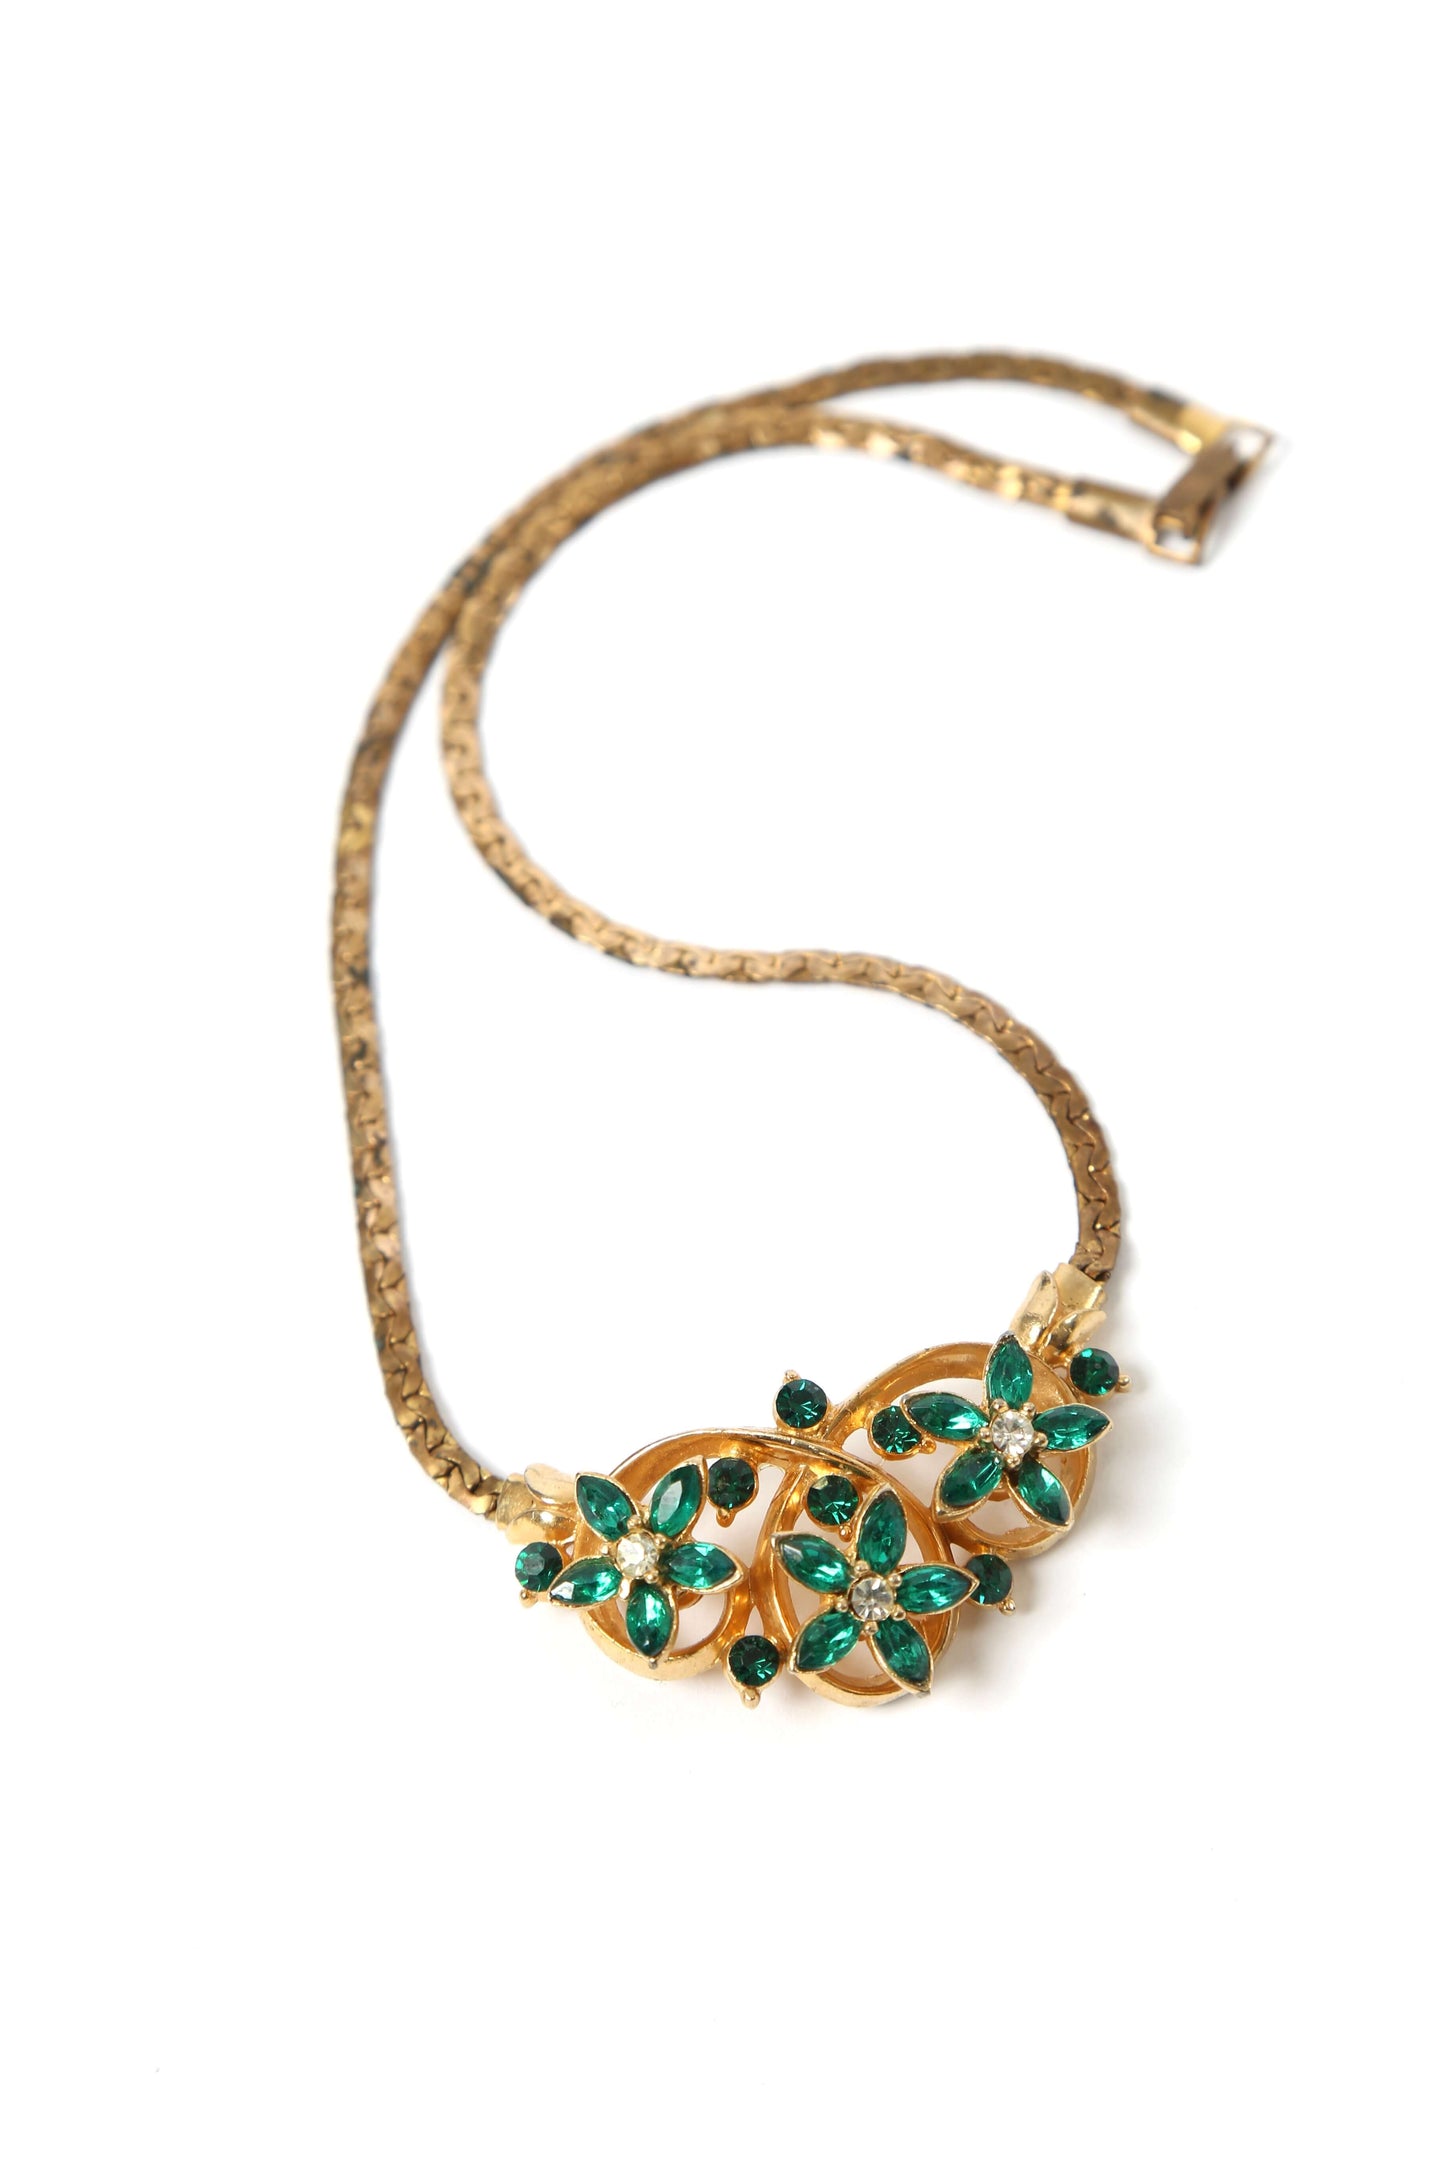 1940's Emerald Green Rhinestone Floral Necklace